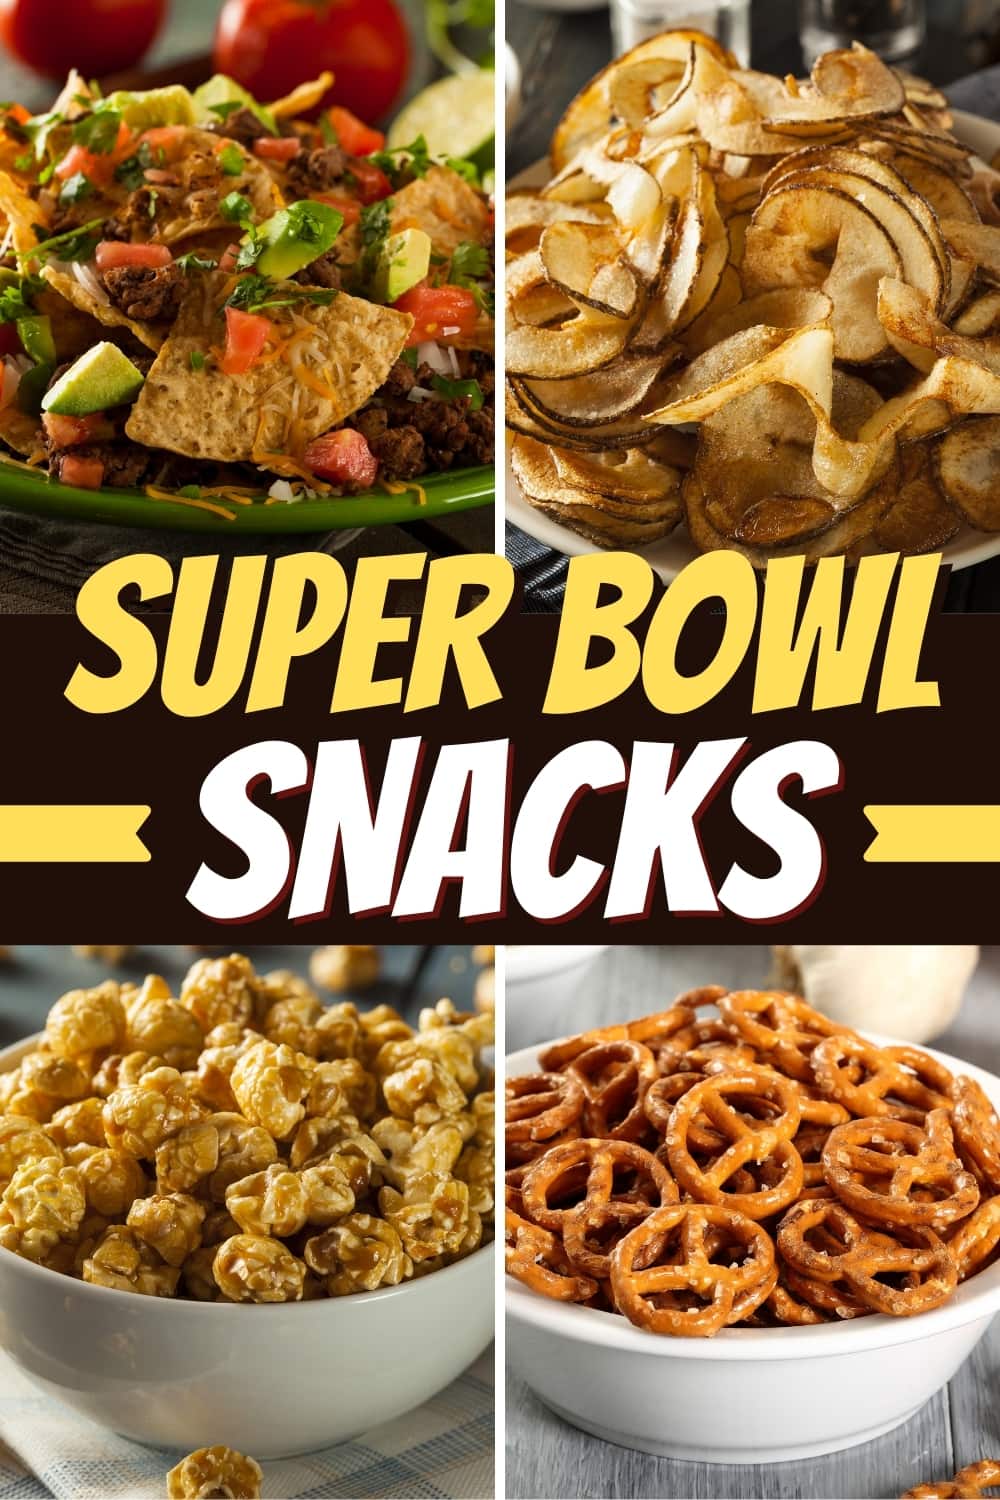 Healthy Super Bowl Dishes - Image to u